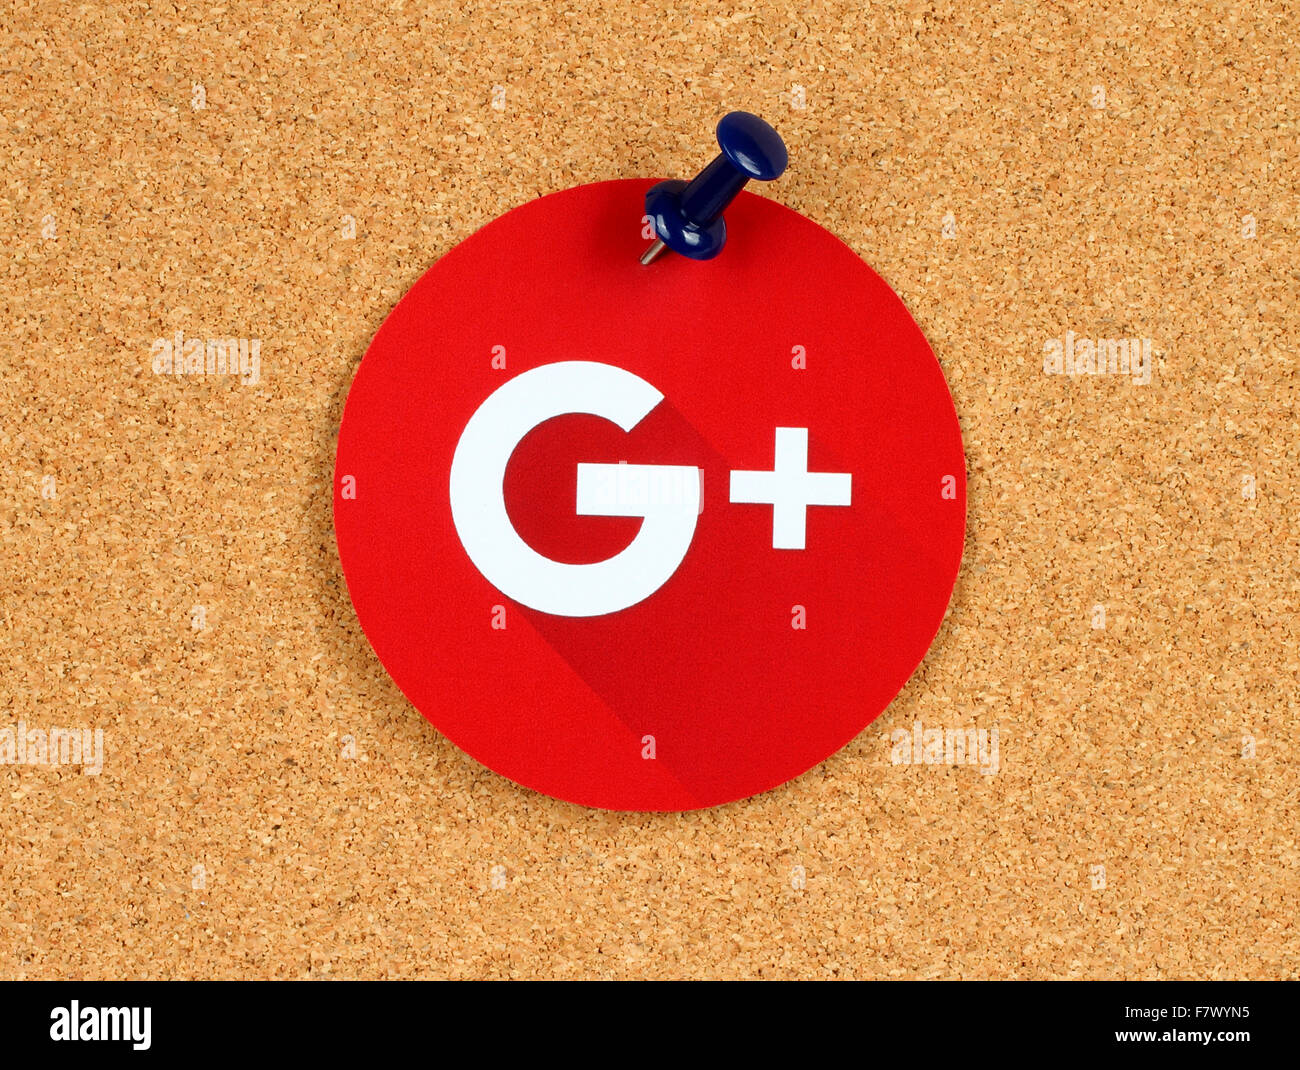 Kiev, Ukraine - October 07, 2015: New Google Plus logo sign printed on paper, cut and pinned on cork bulletin board. Stock Photo